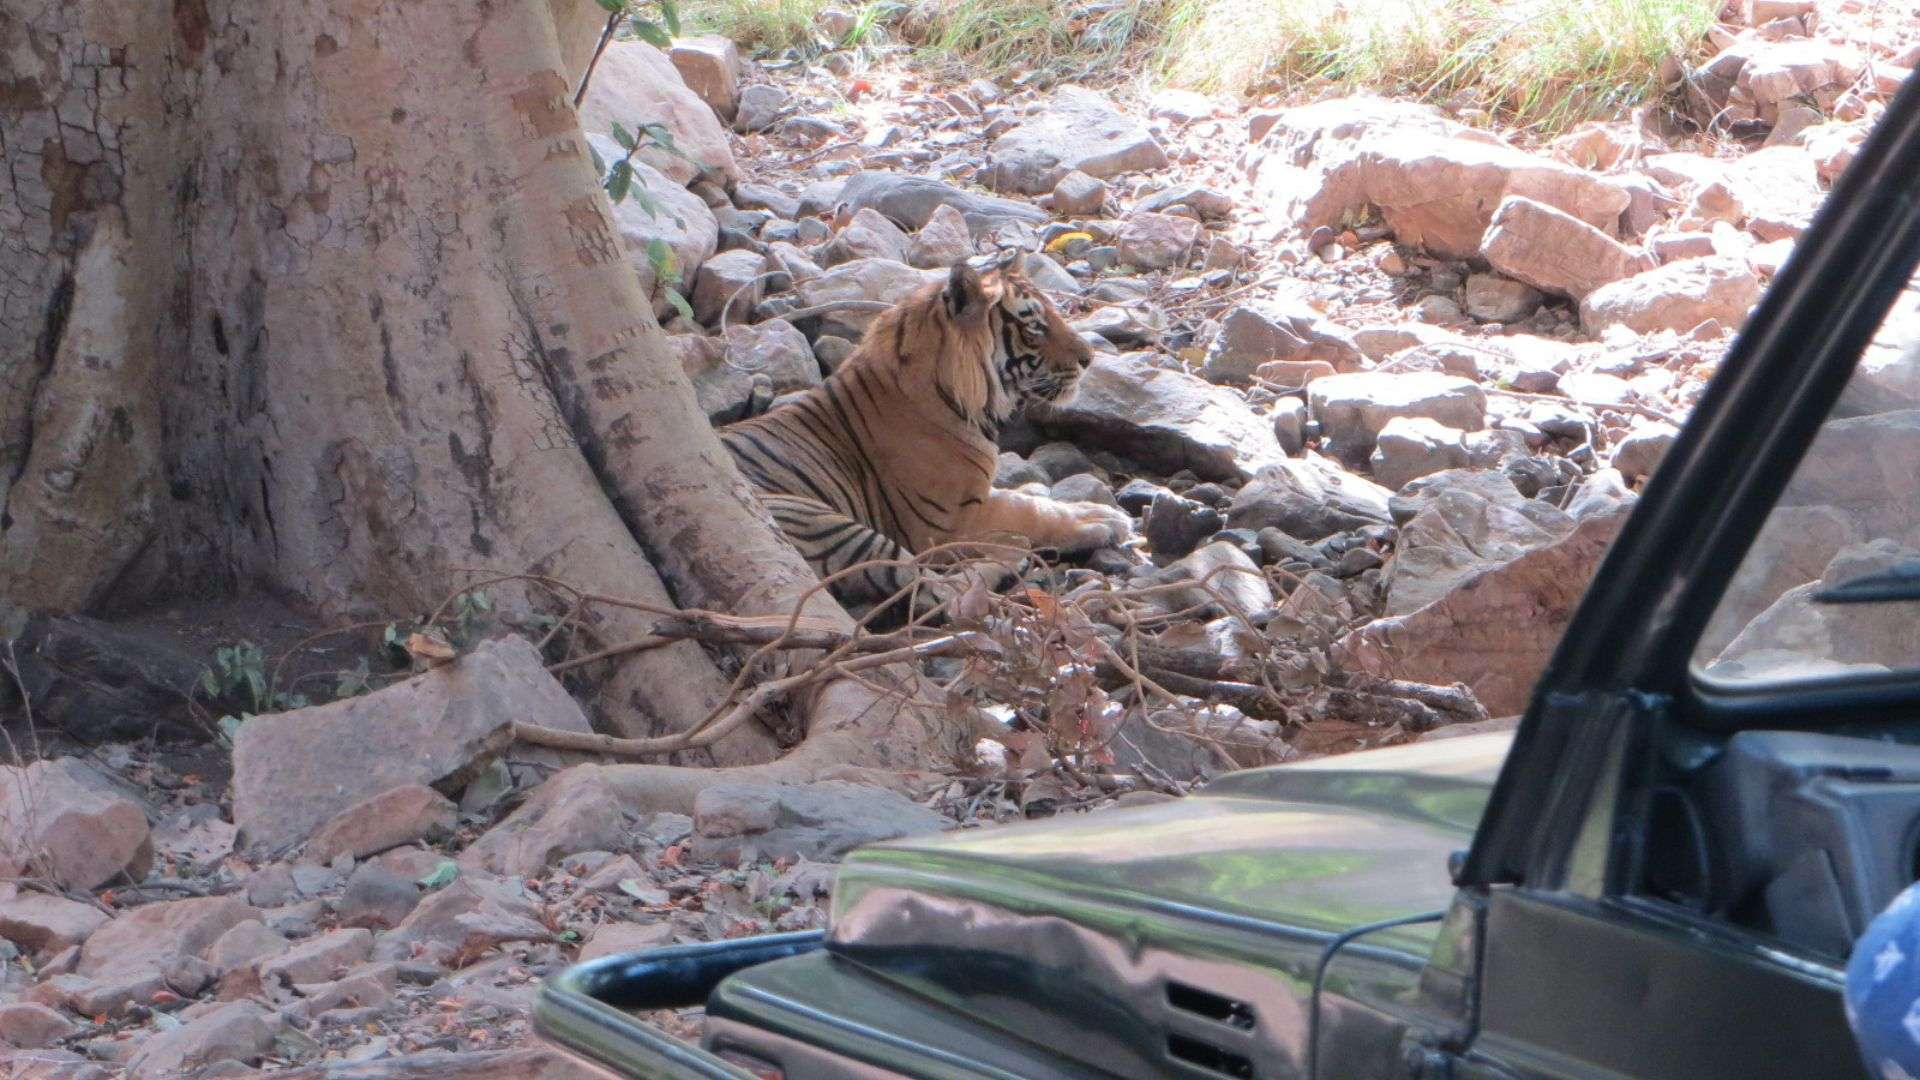 A tiger in the Indian reserve, hiding under a tree for shade